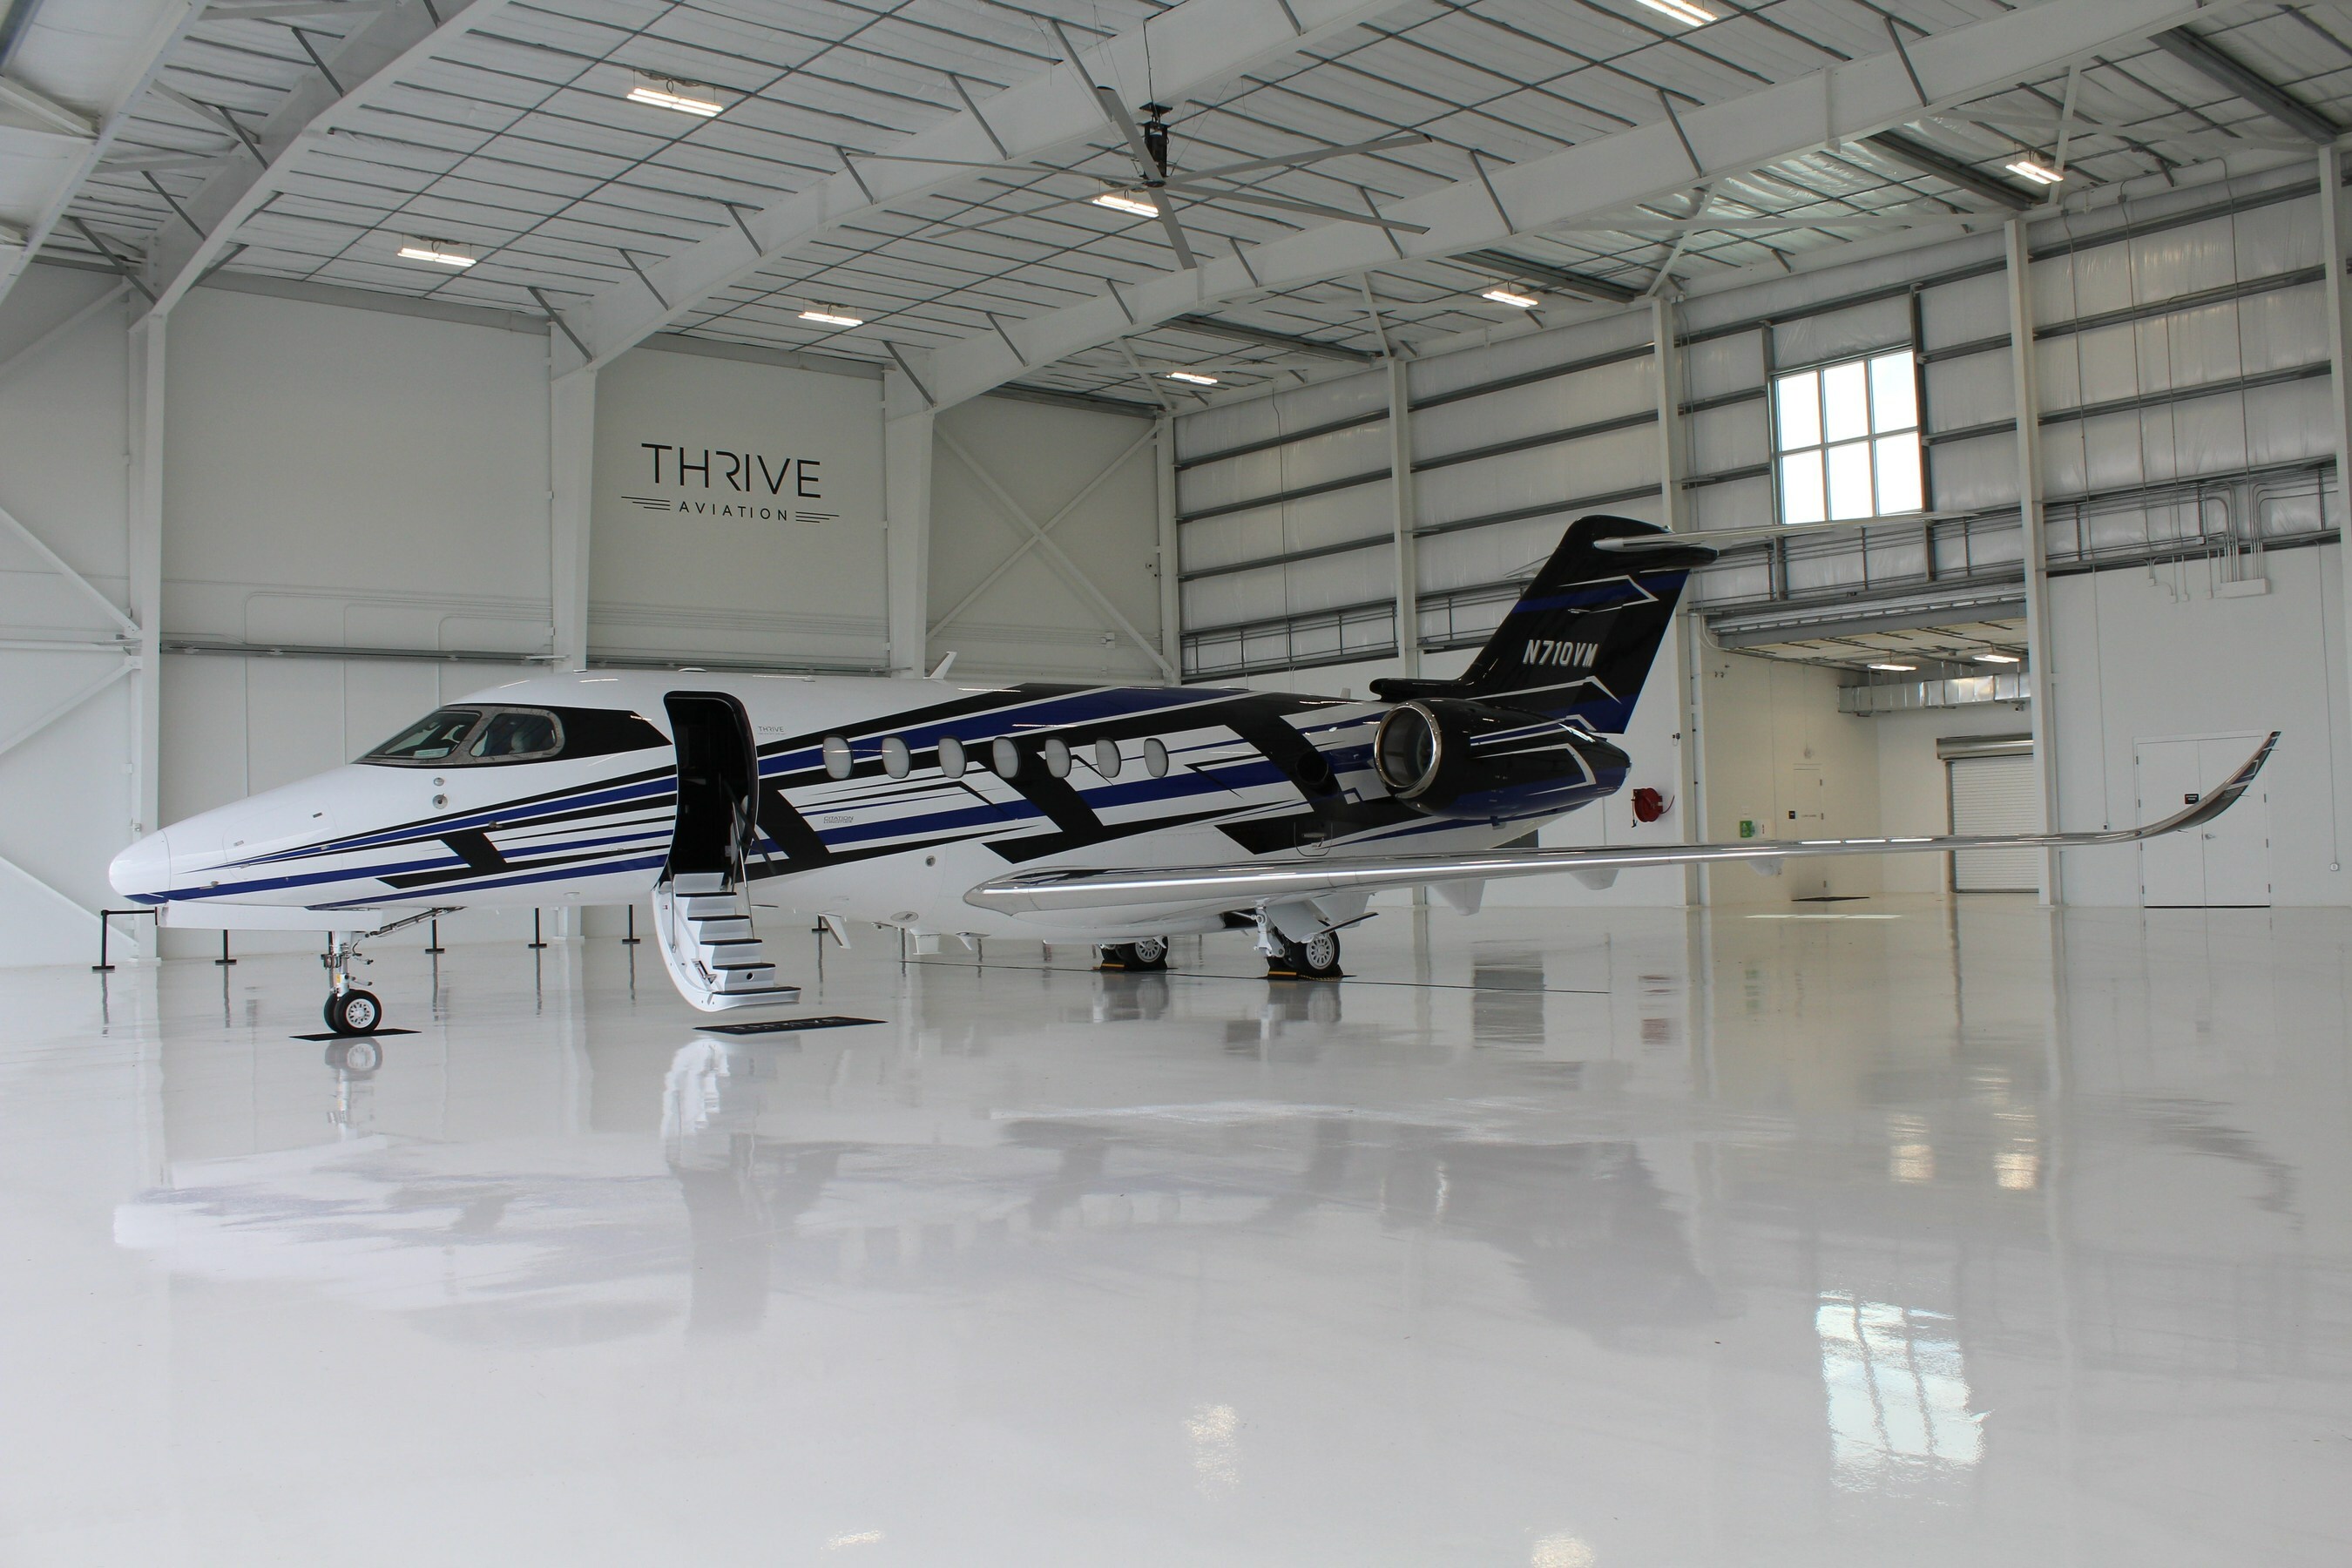 Image of an private jet airplane